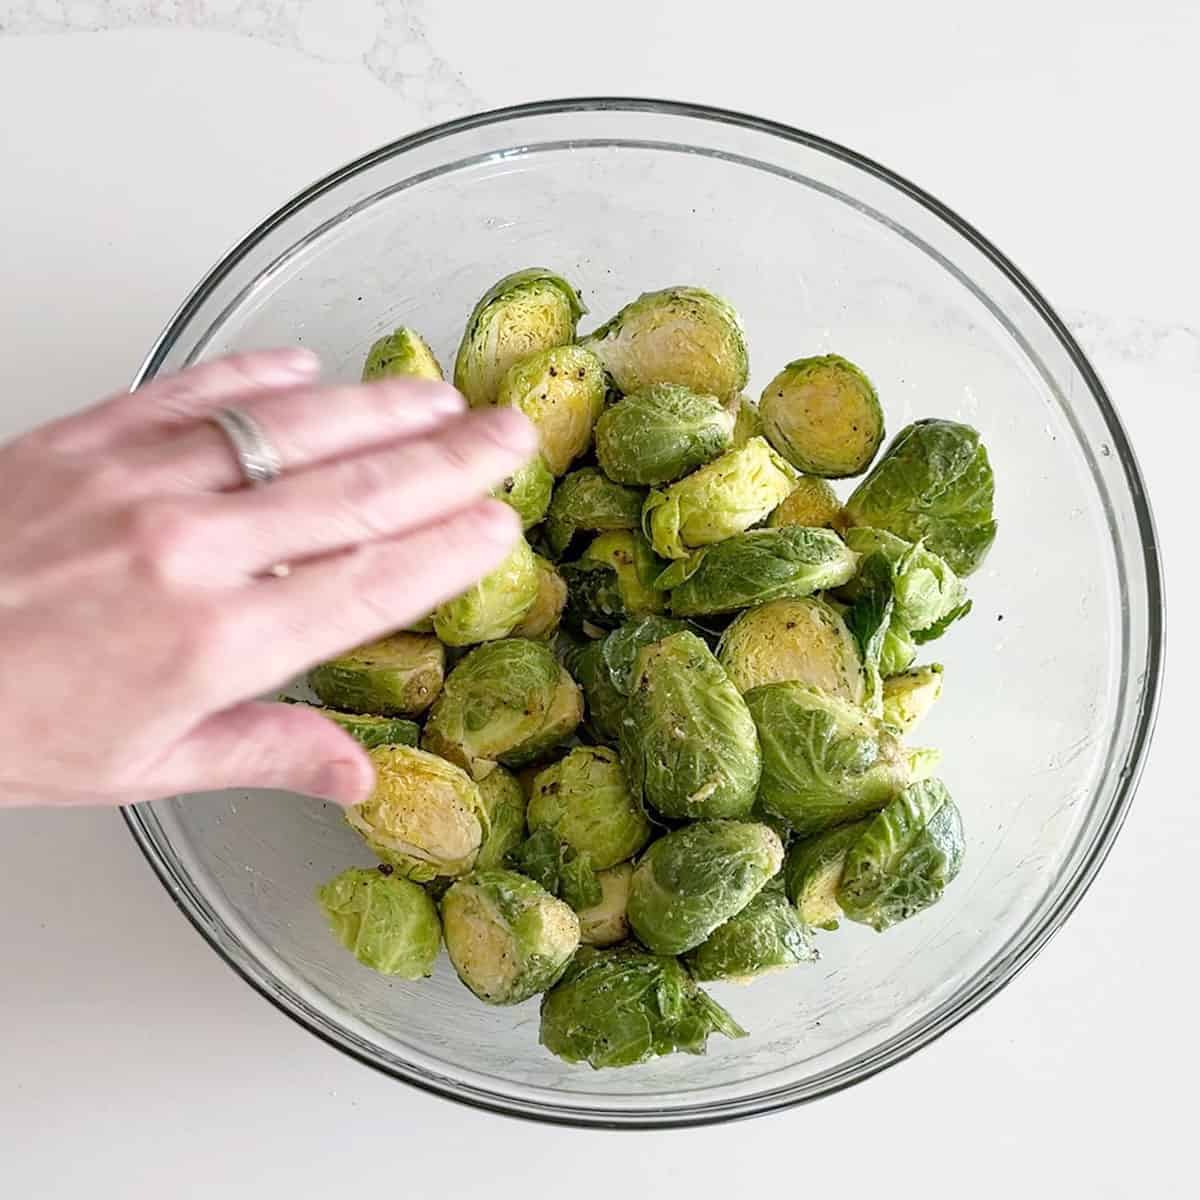 Coating Brussels sprouts in melted butter, honey, and spices.